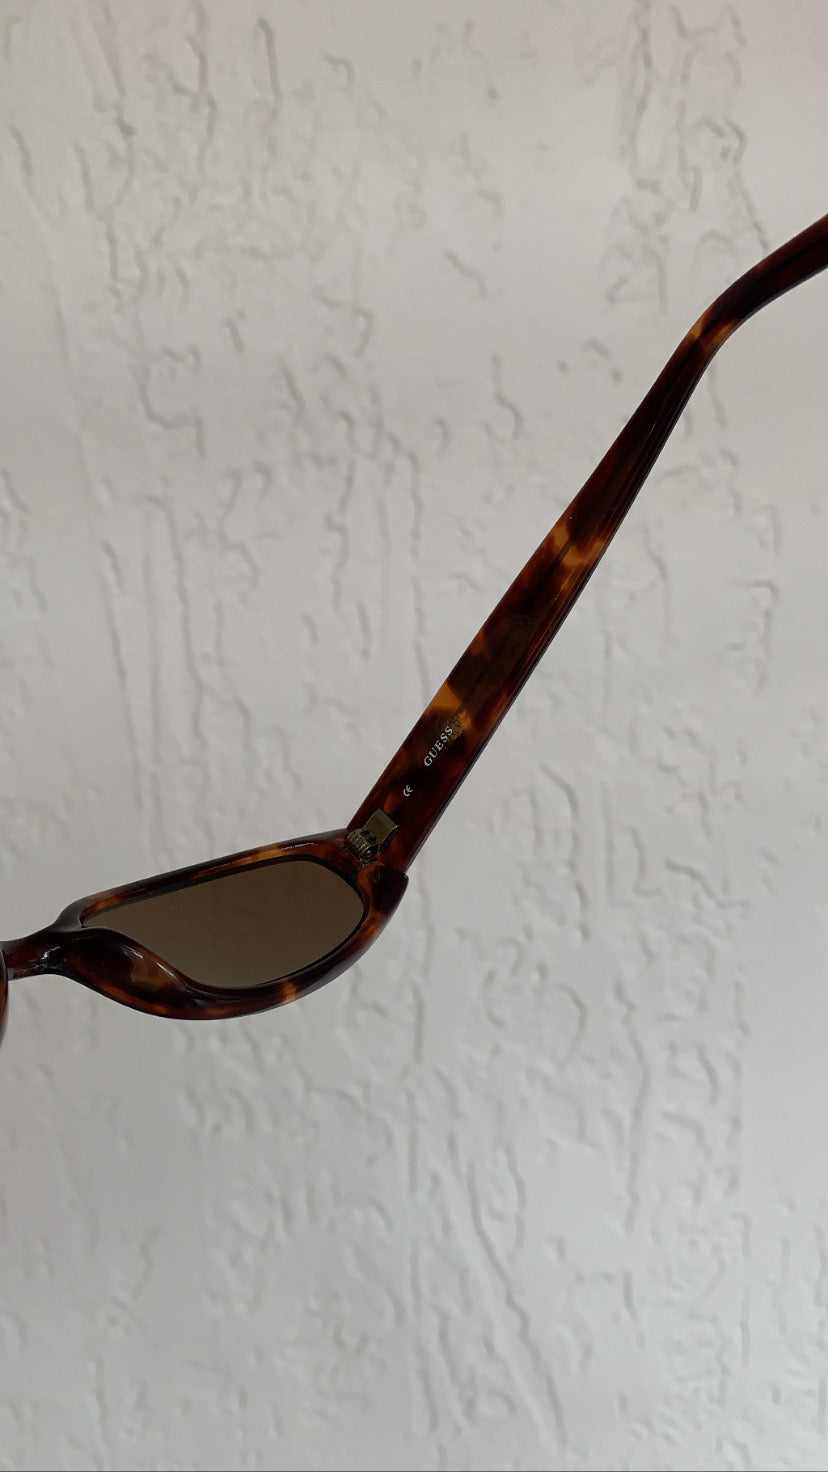 Vintage Guess Tortoise Shell Sunnies